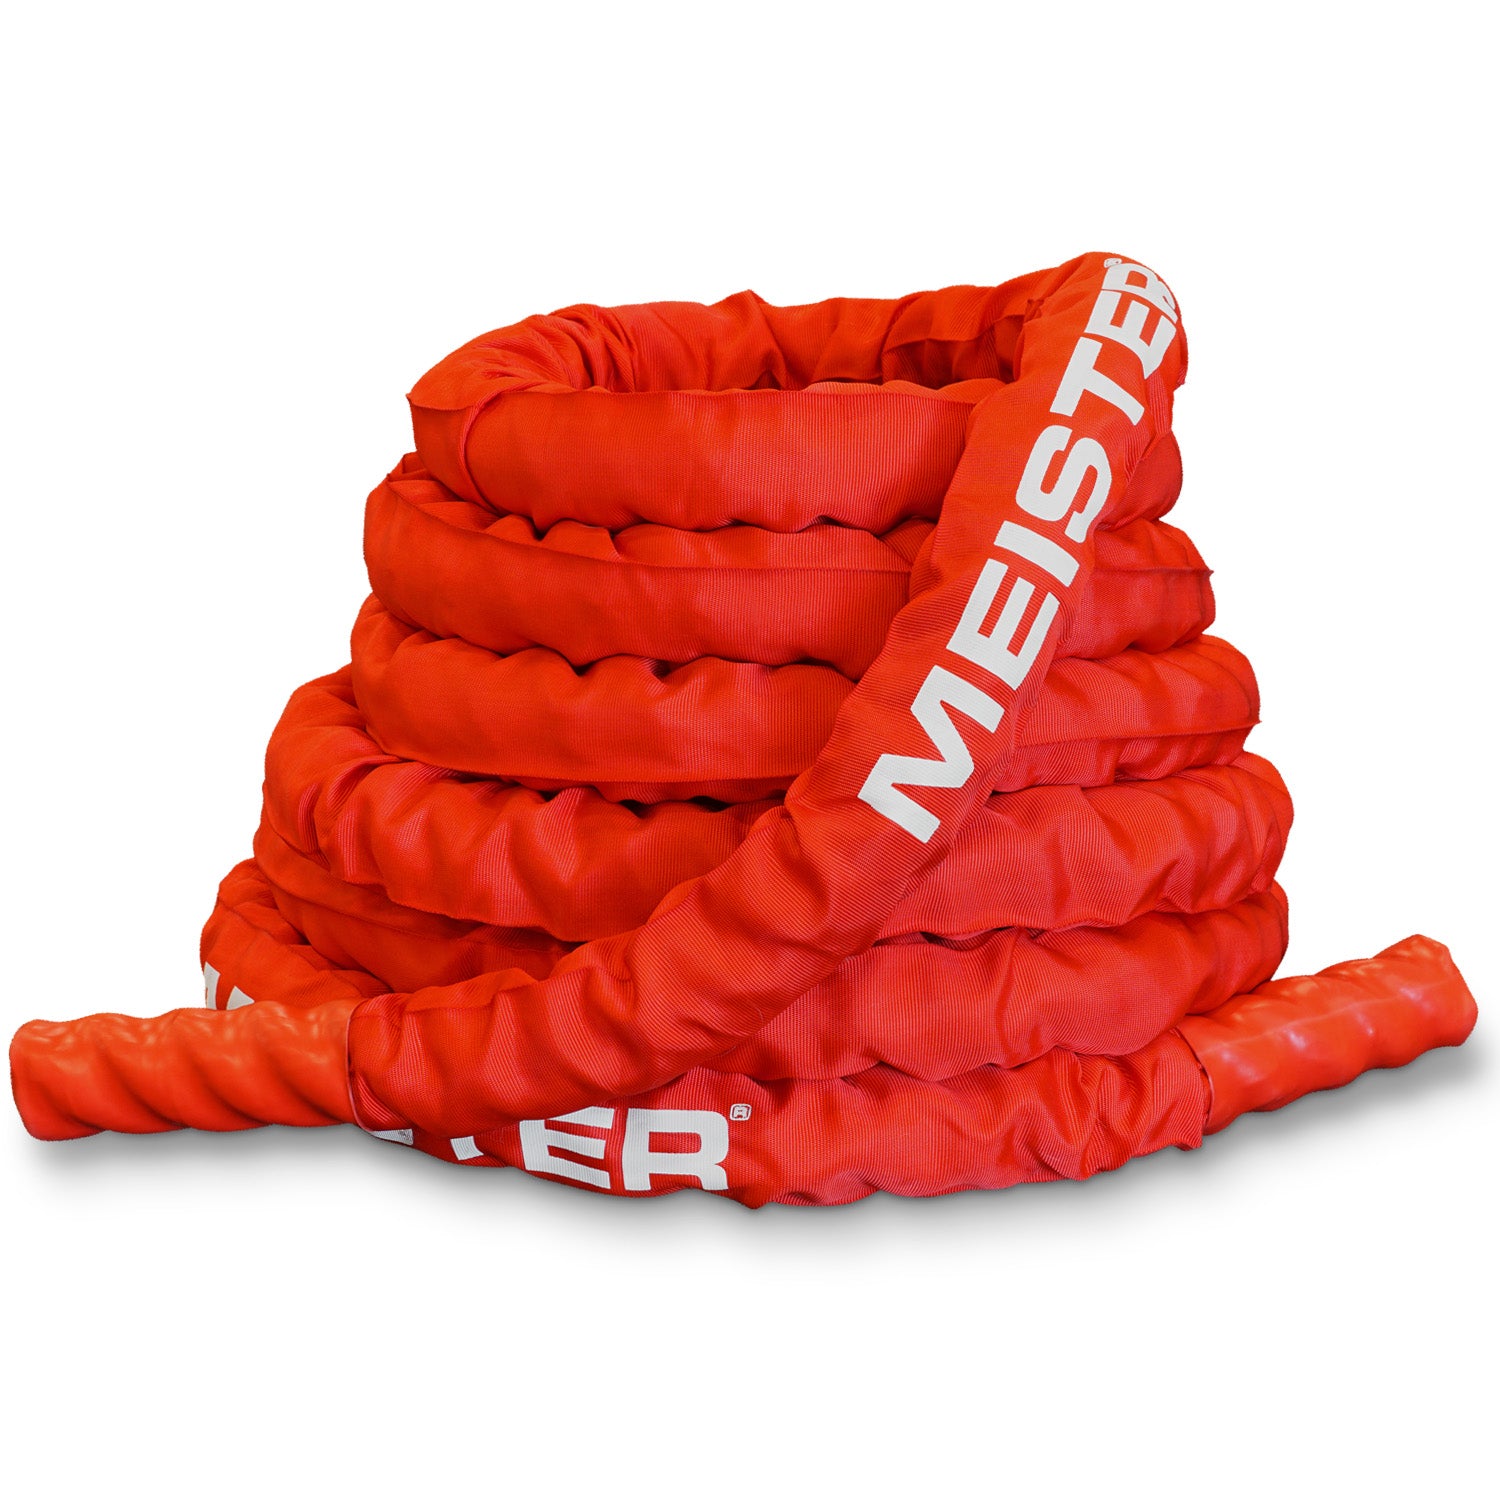 Meister BEAST Professional Sheathed Battle Rope - 2.5" Diameter / Red